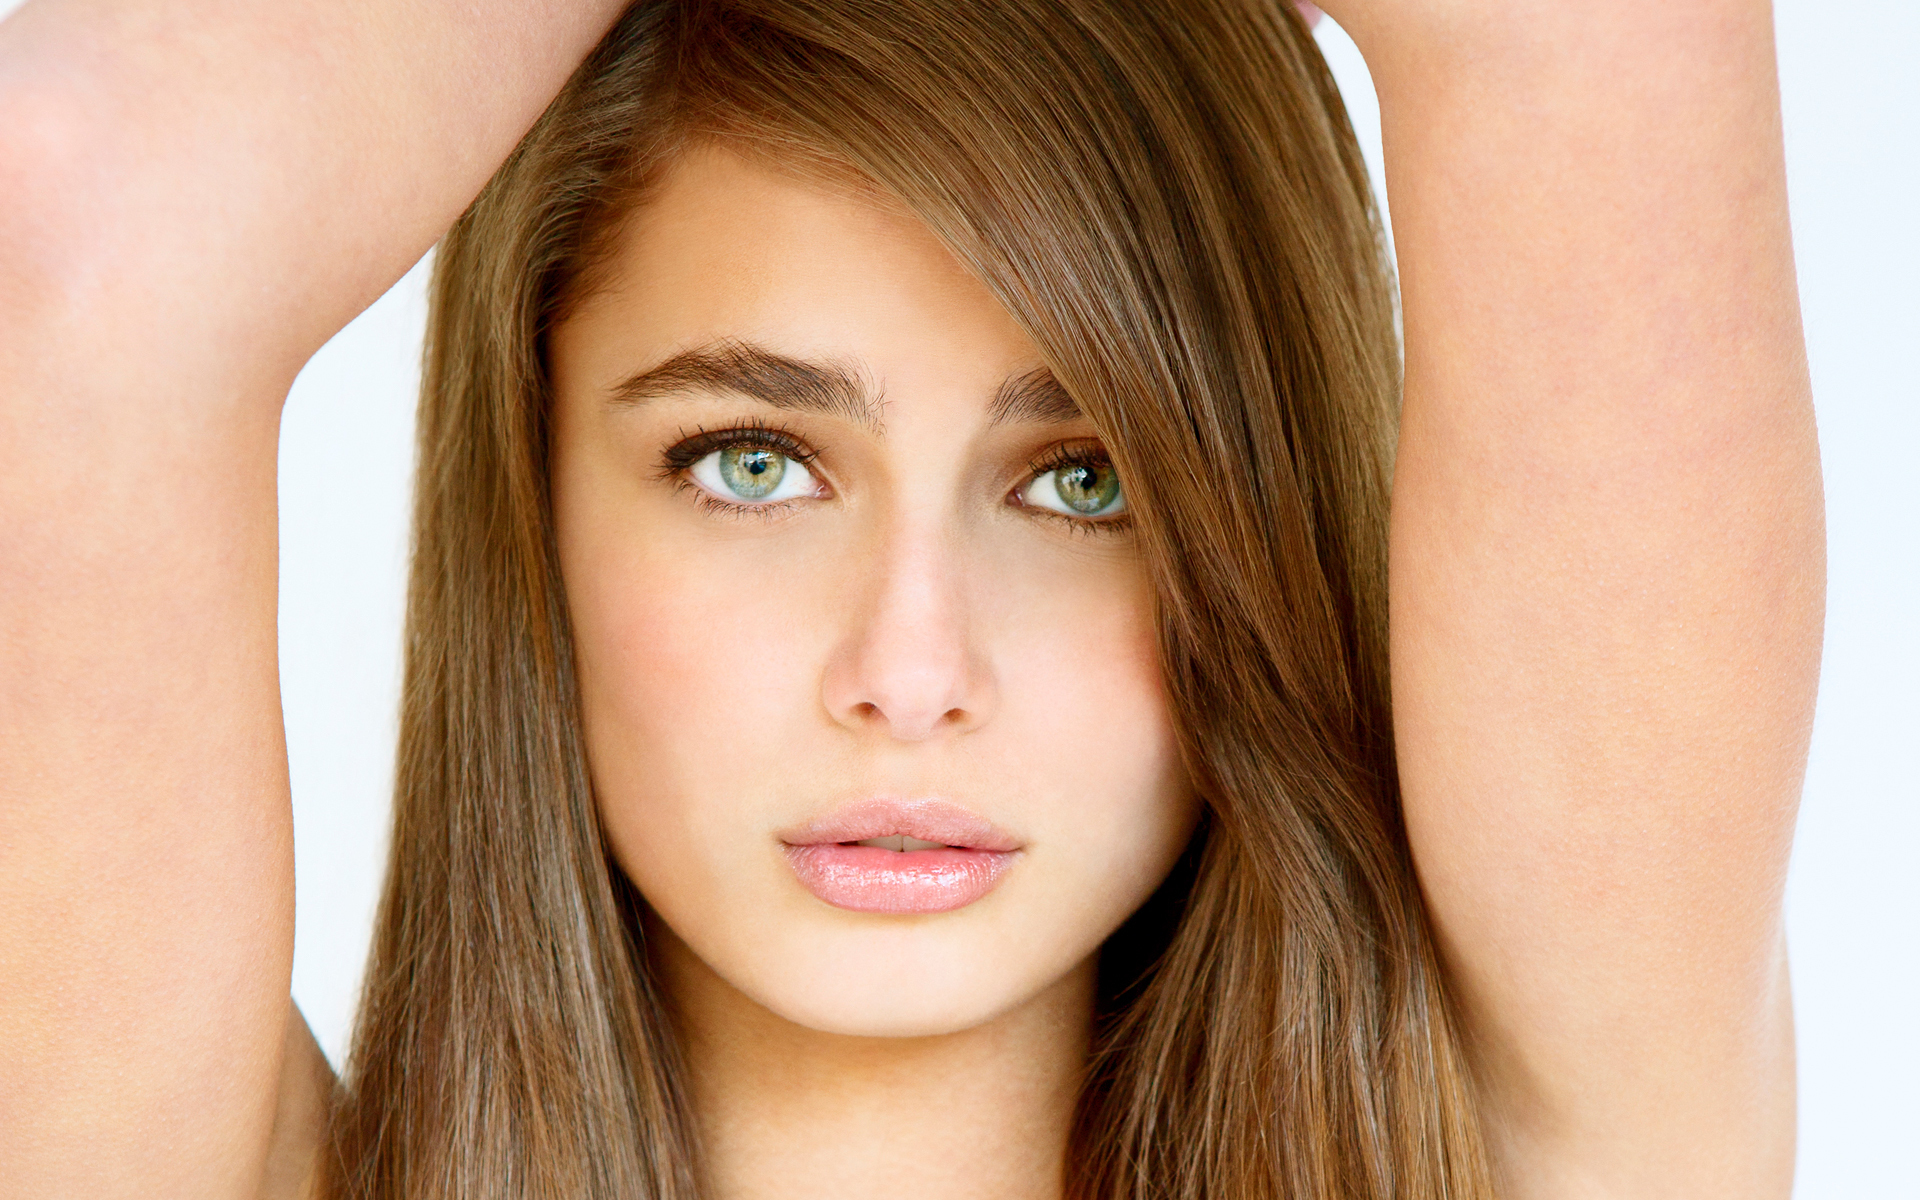 Download Taylor Hill Wallpaper Image Photos Pictures Background By Angelae Taylor Hill